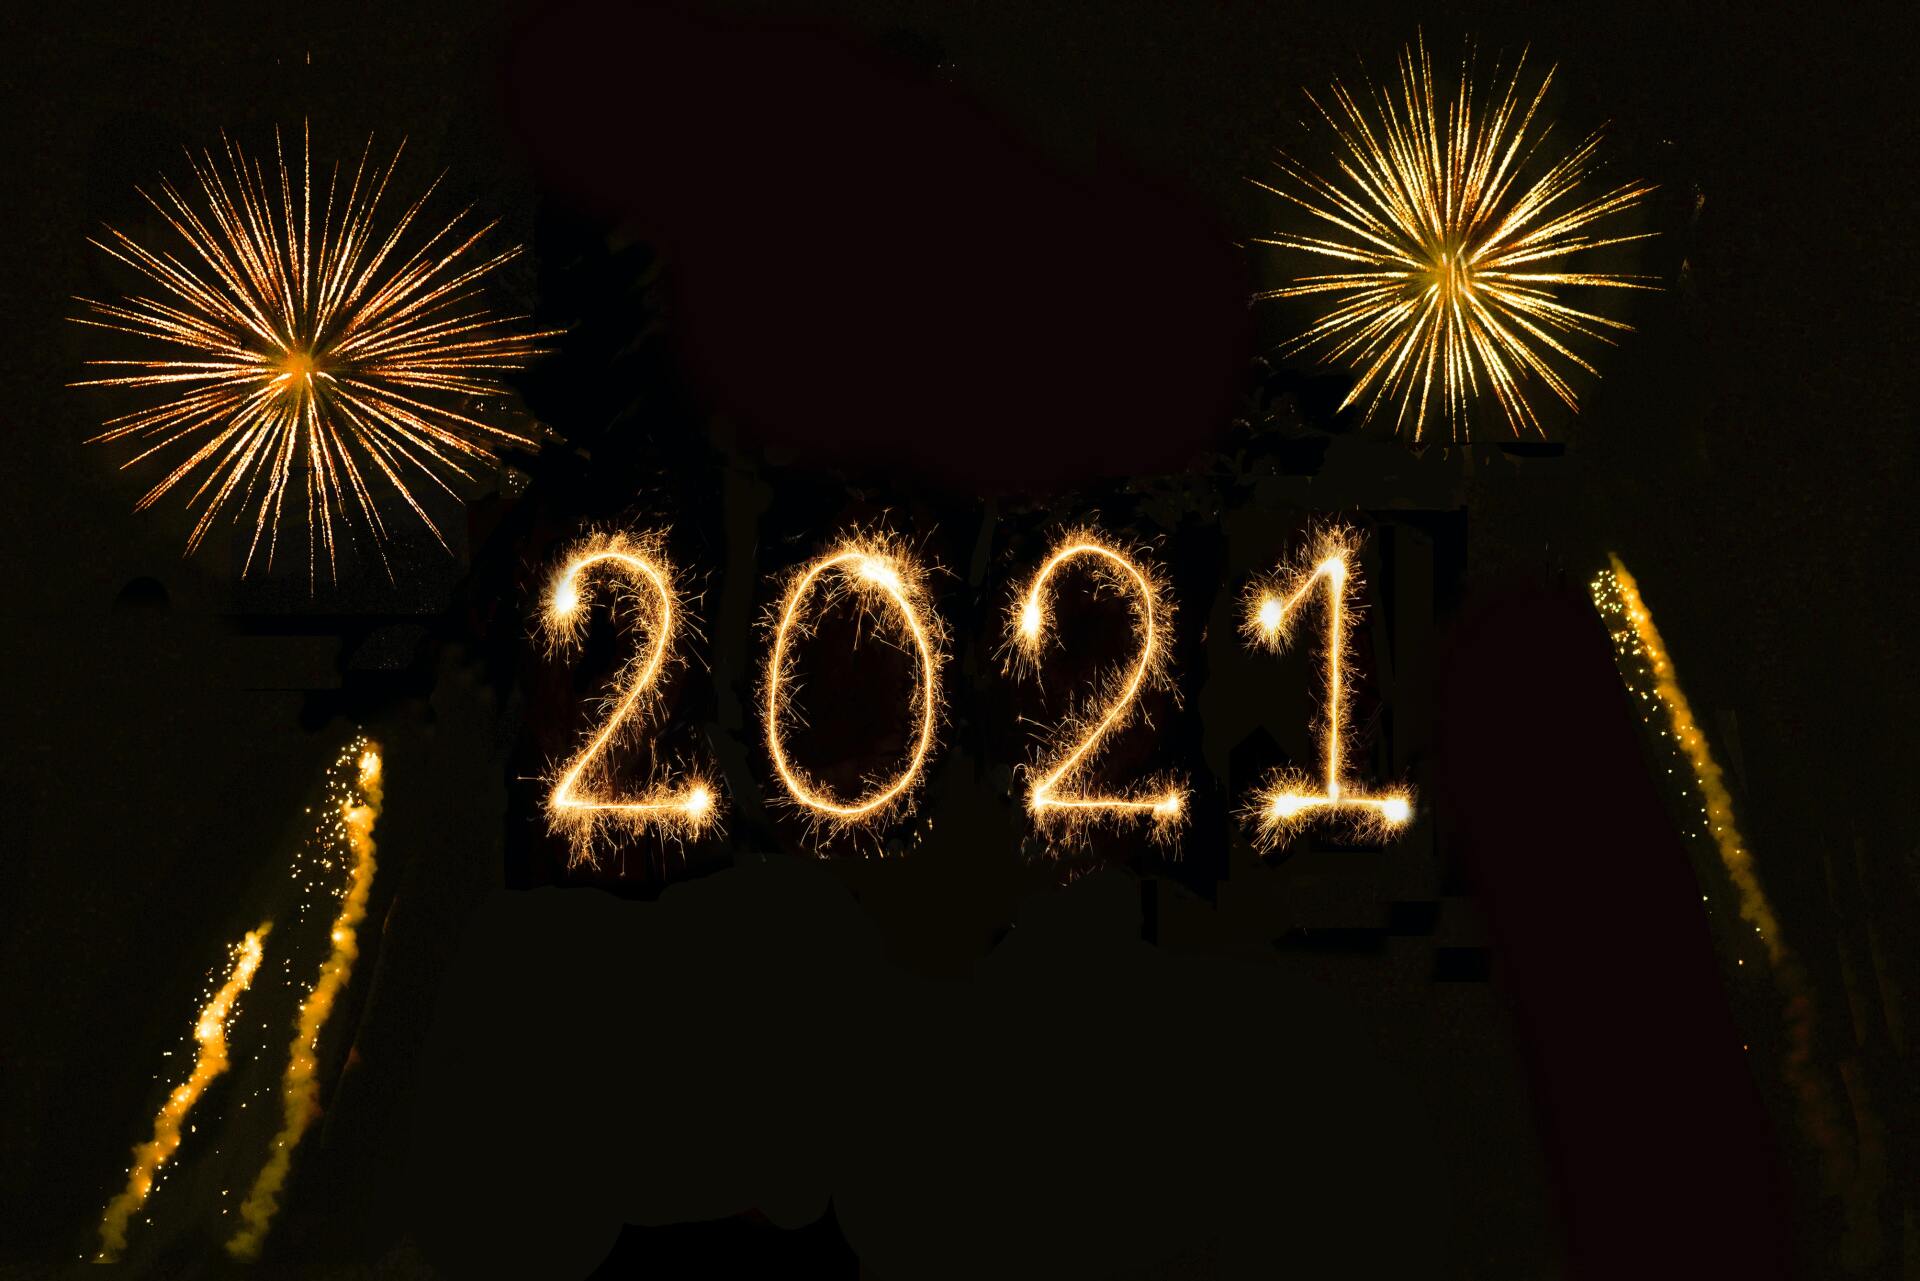 The year, 2021, is highlighted using sparklers